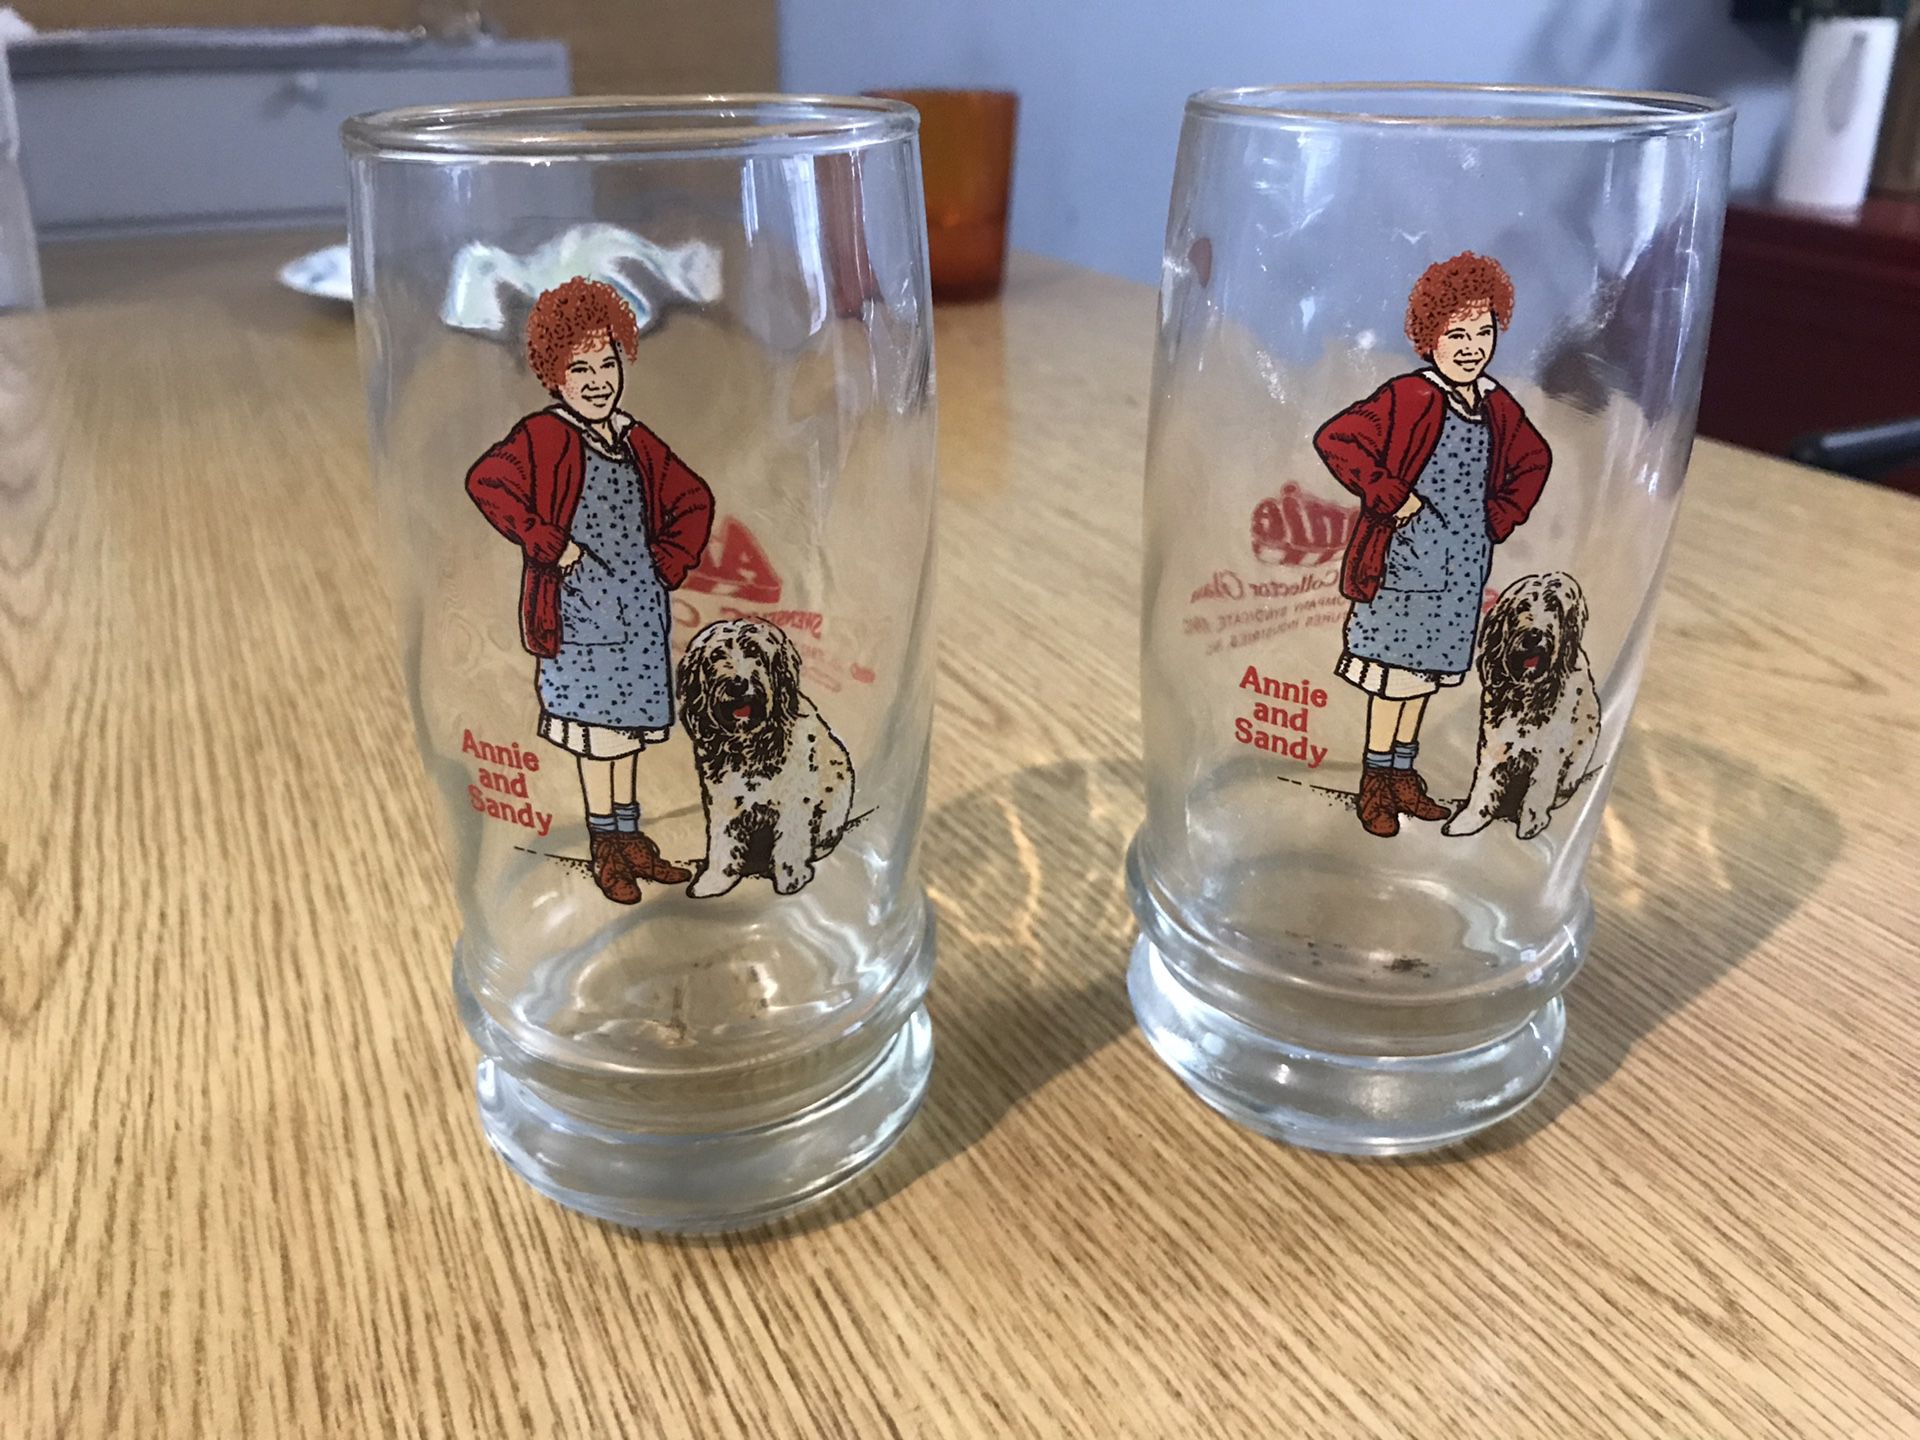 Annie Glasses from 1982 Swensen’s collectibles